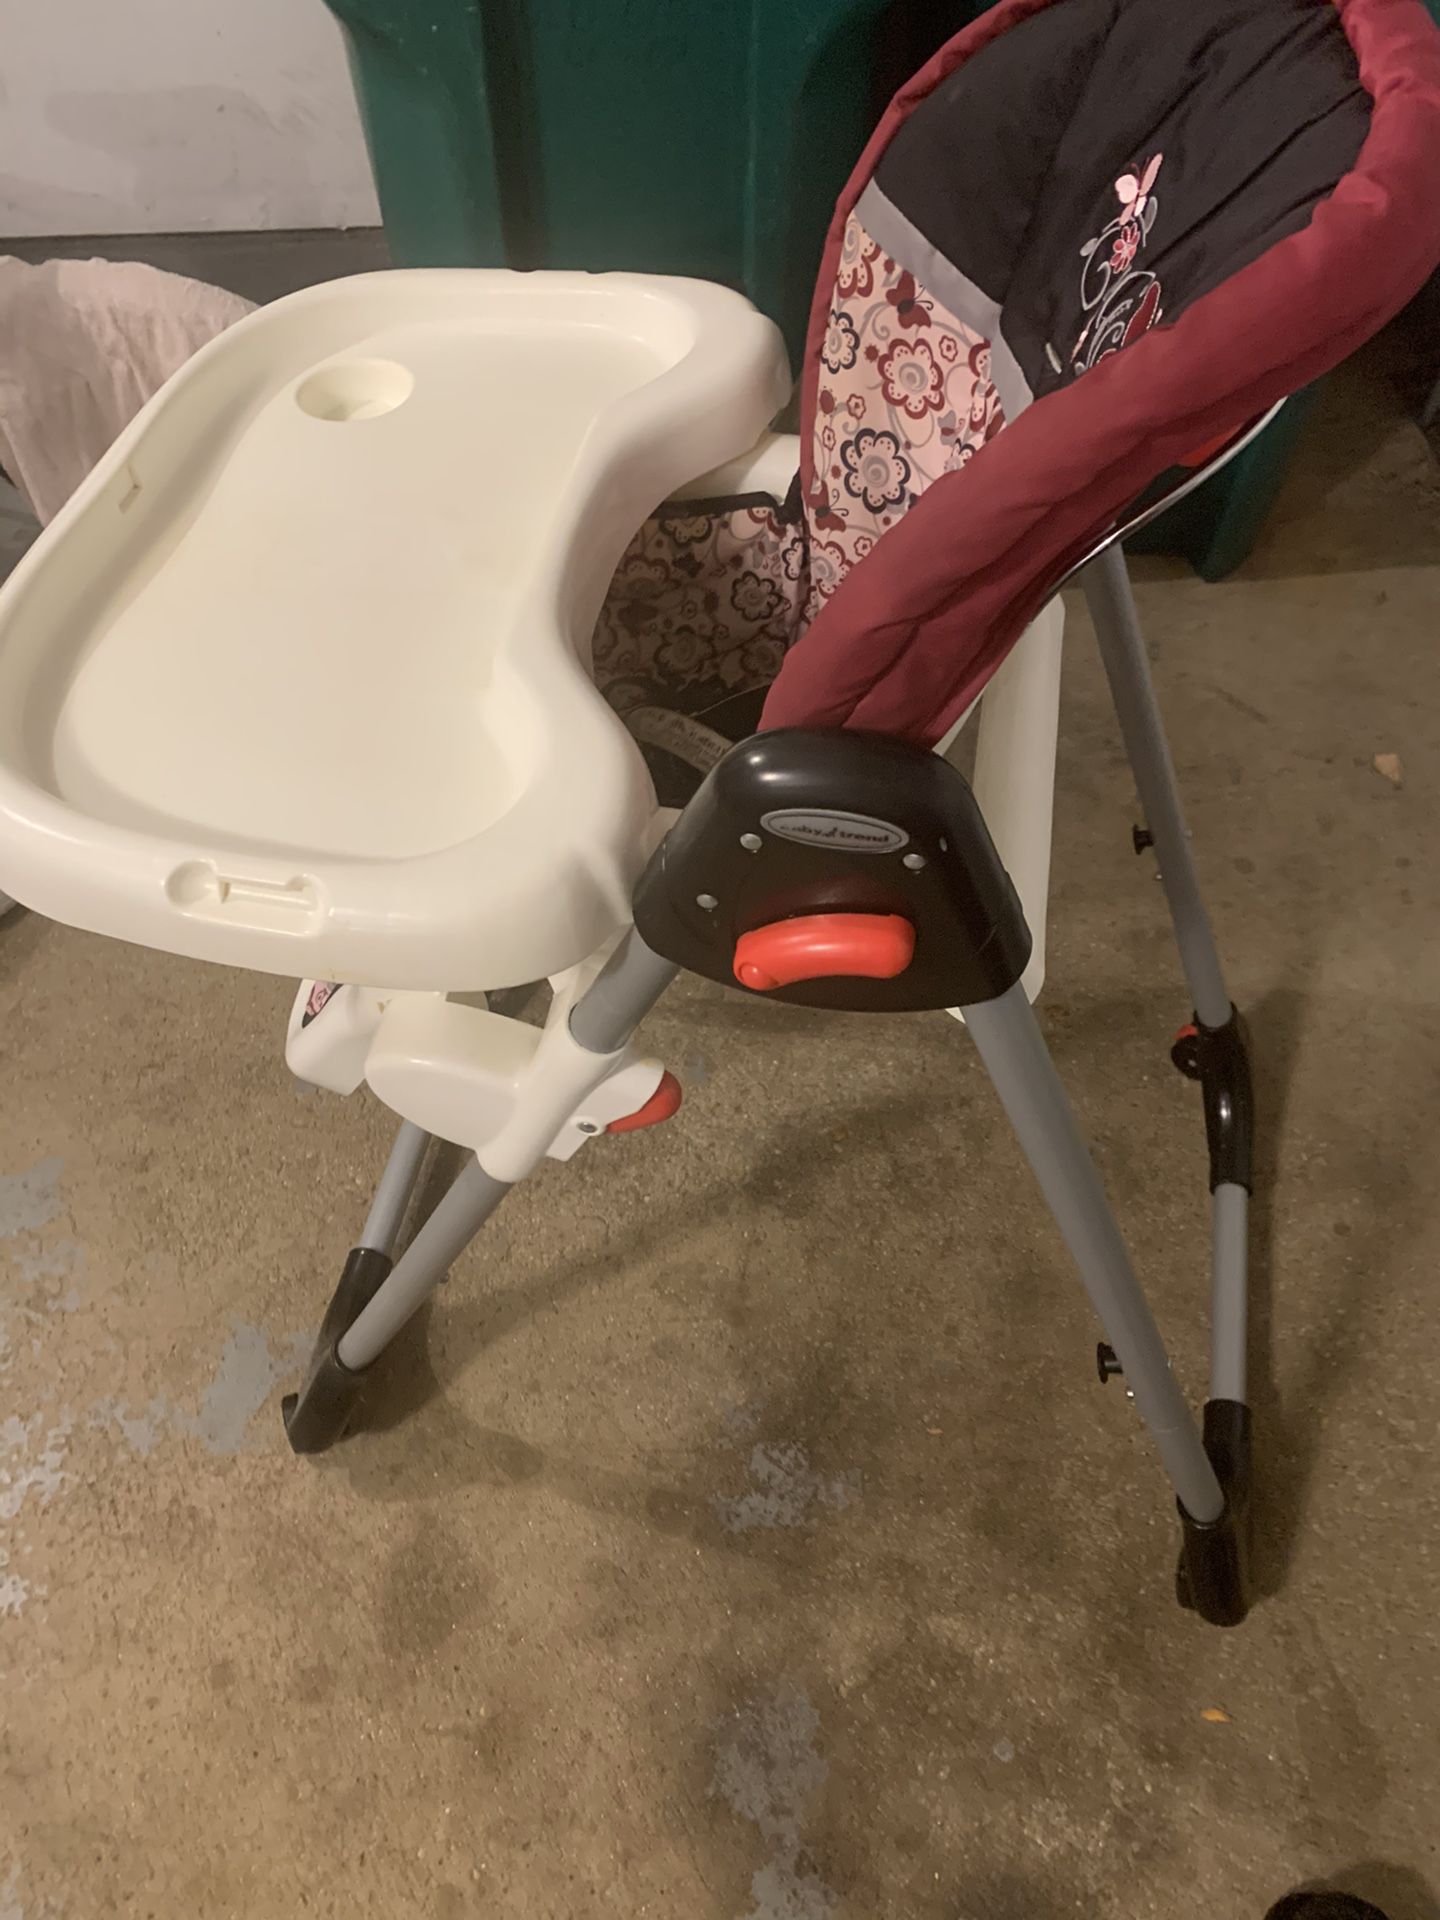 High chair for free. Pick up buffalo Grove, Illinois 60089